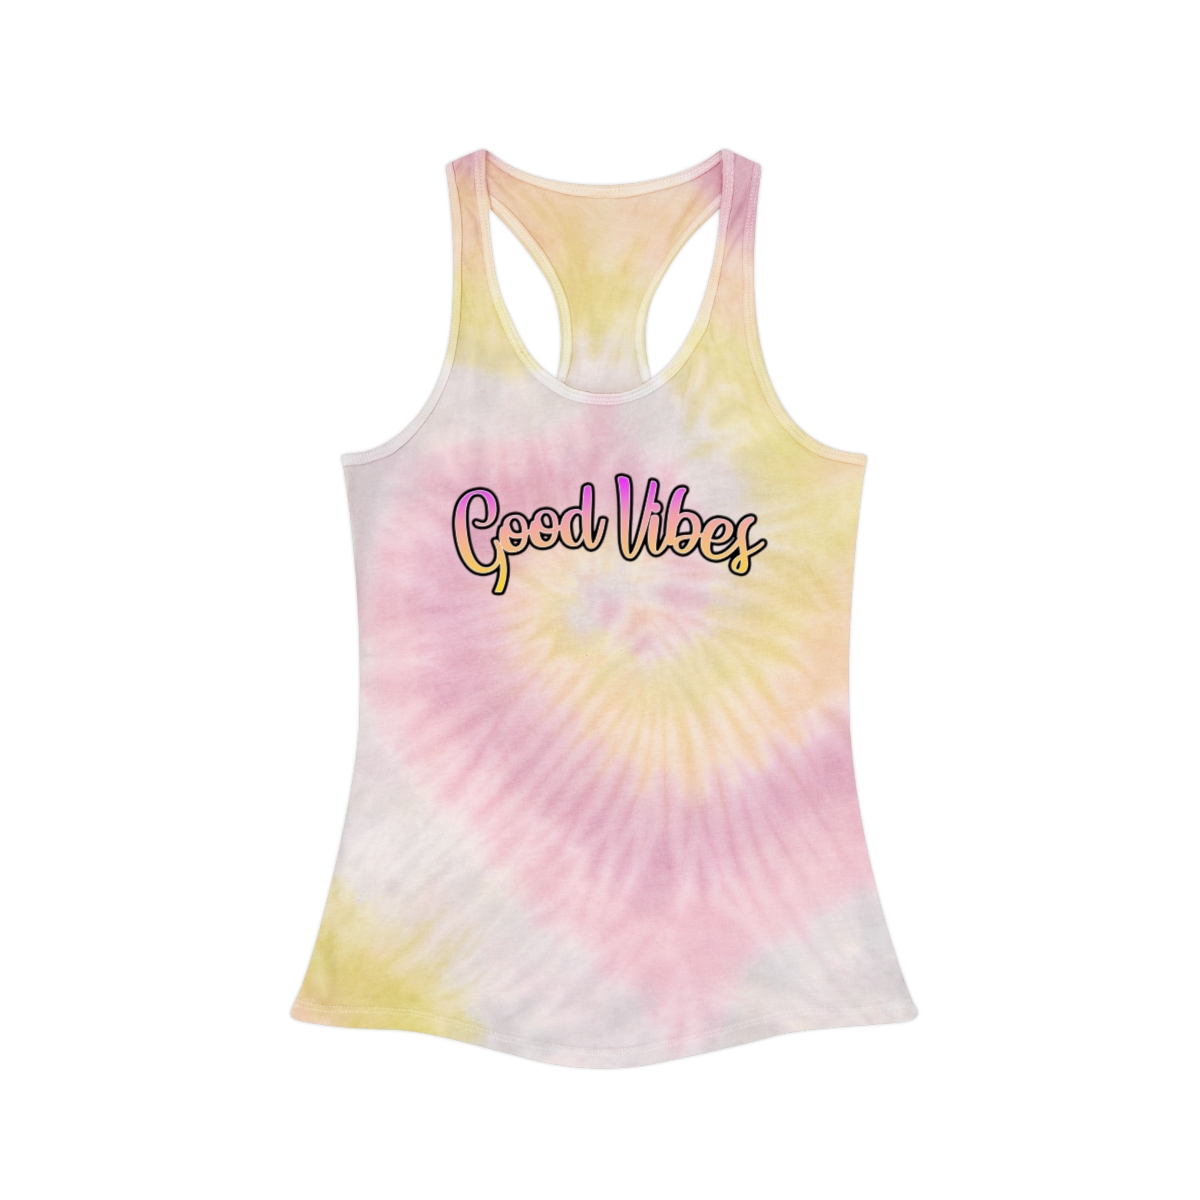 Support Good Vibes Tank Top